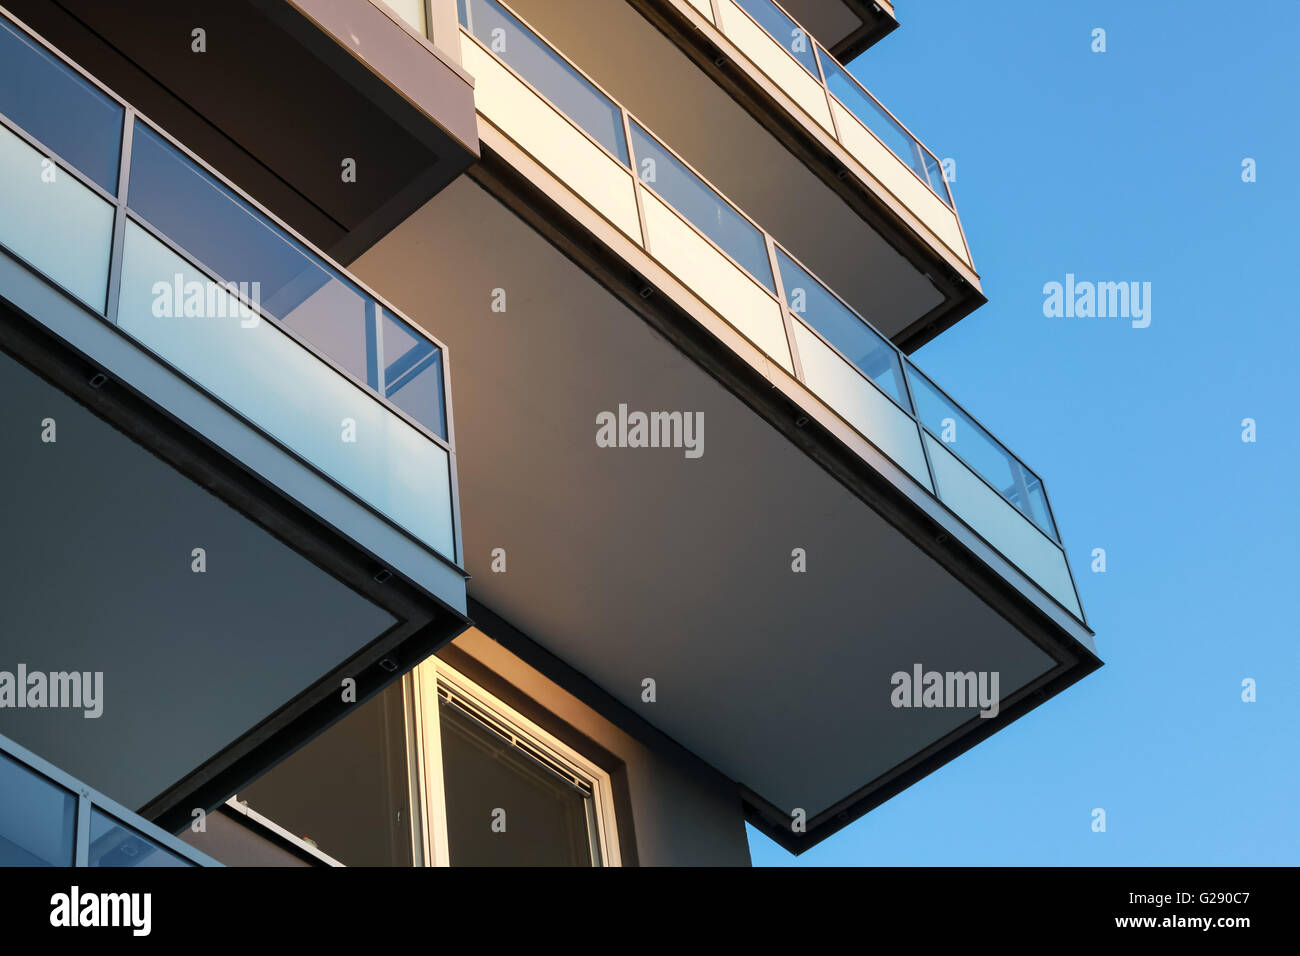 Abstract fragment of contemporary architecture, balconies with glass railings Stock Photo